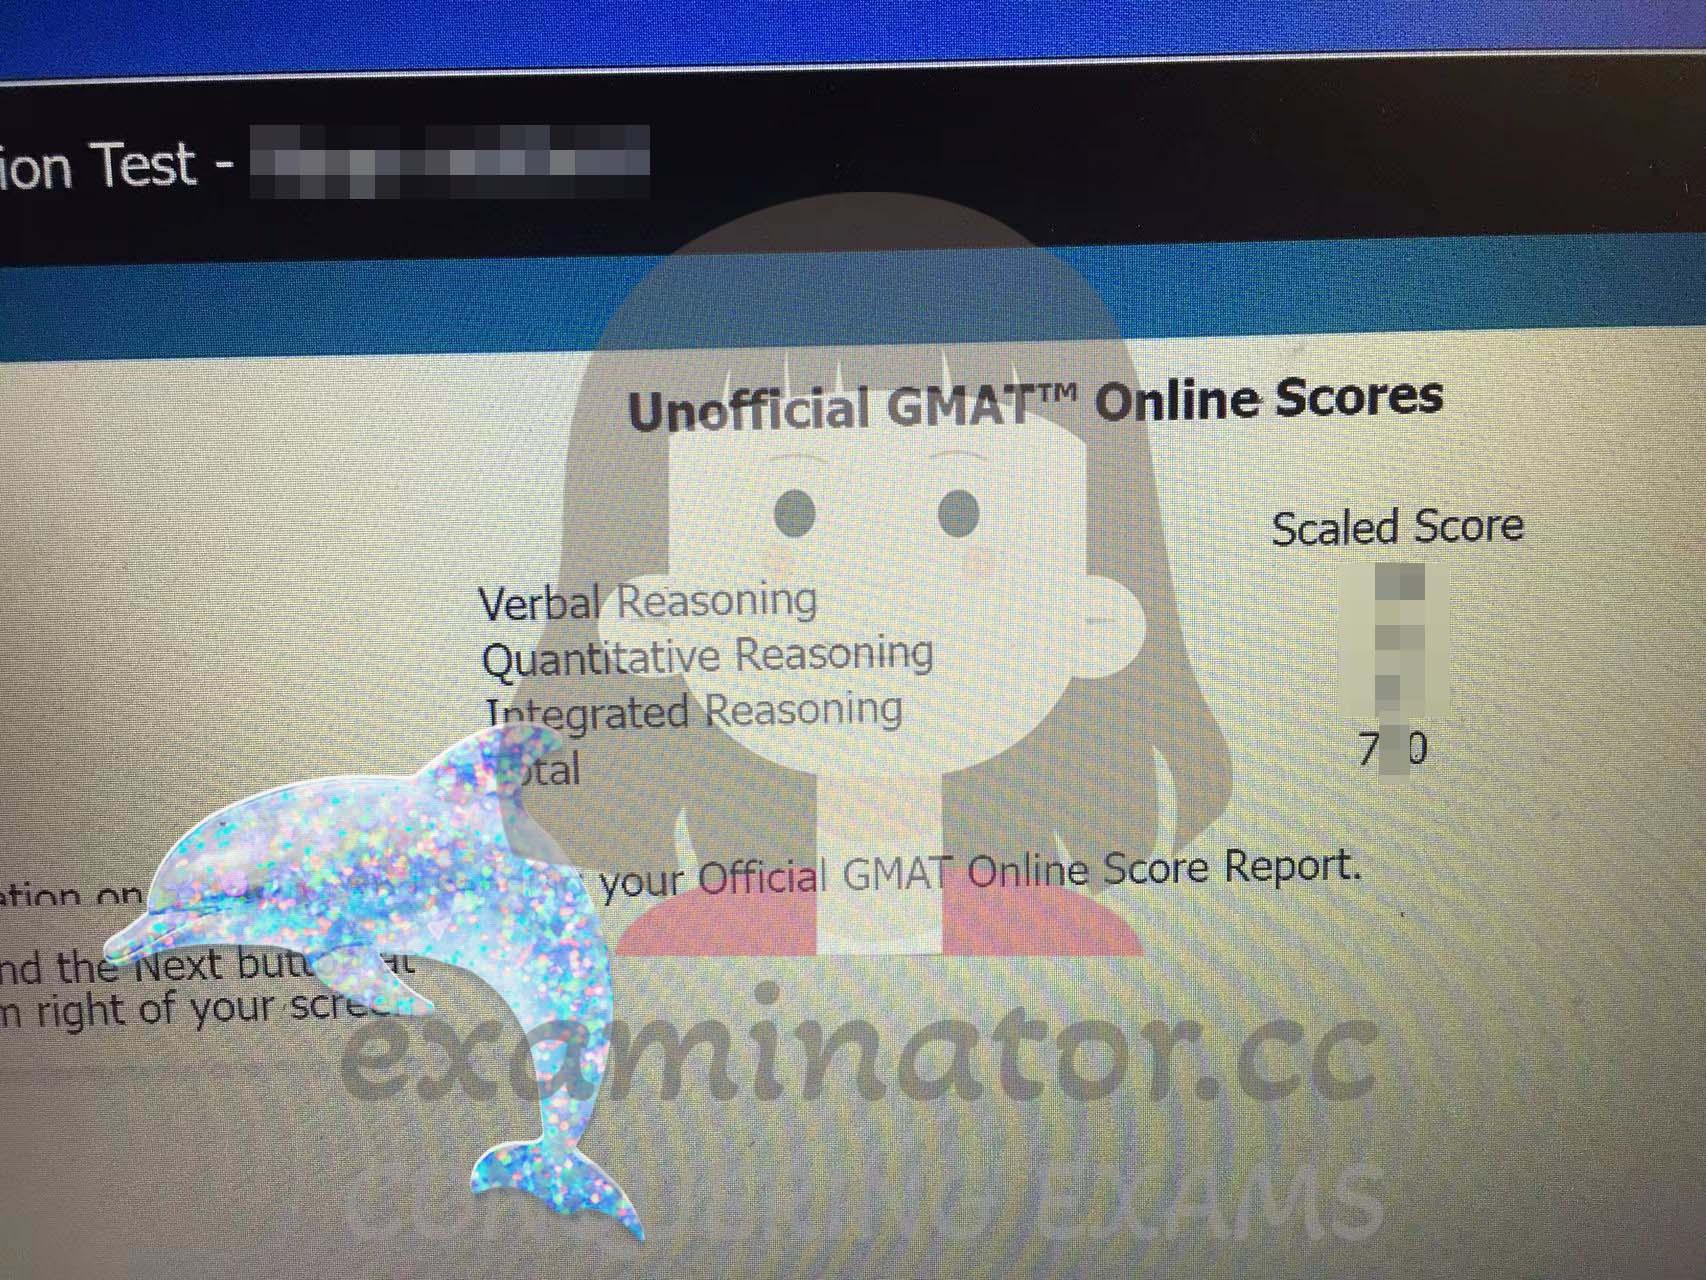 🇮🇪 "Crazy😃": Our First Irish Client Achieves Target GMAT Online Score with Our GMAT Exam Proxy Help